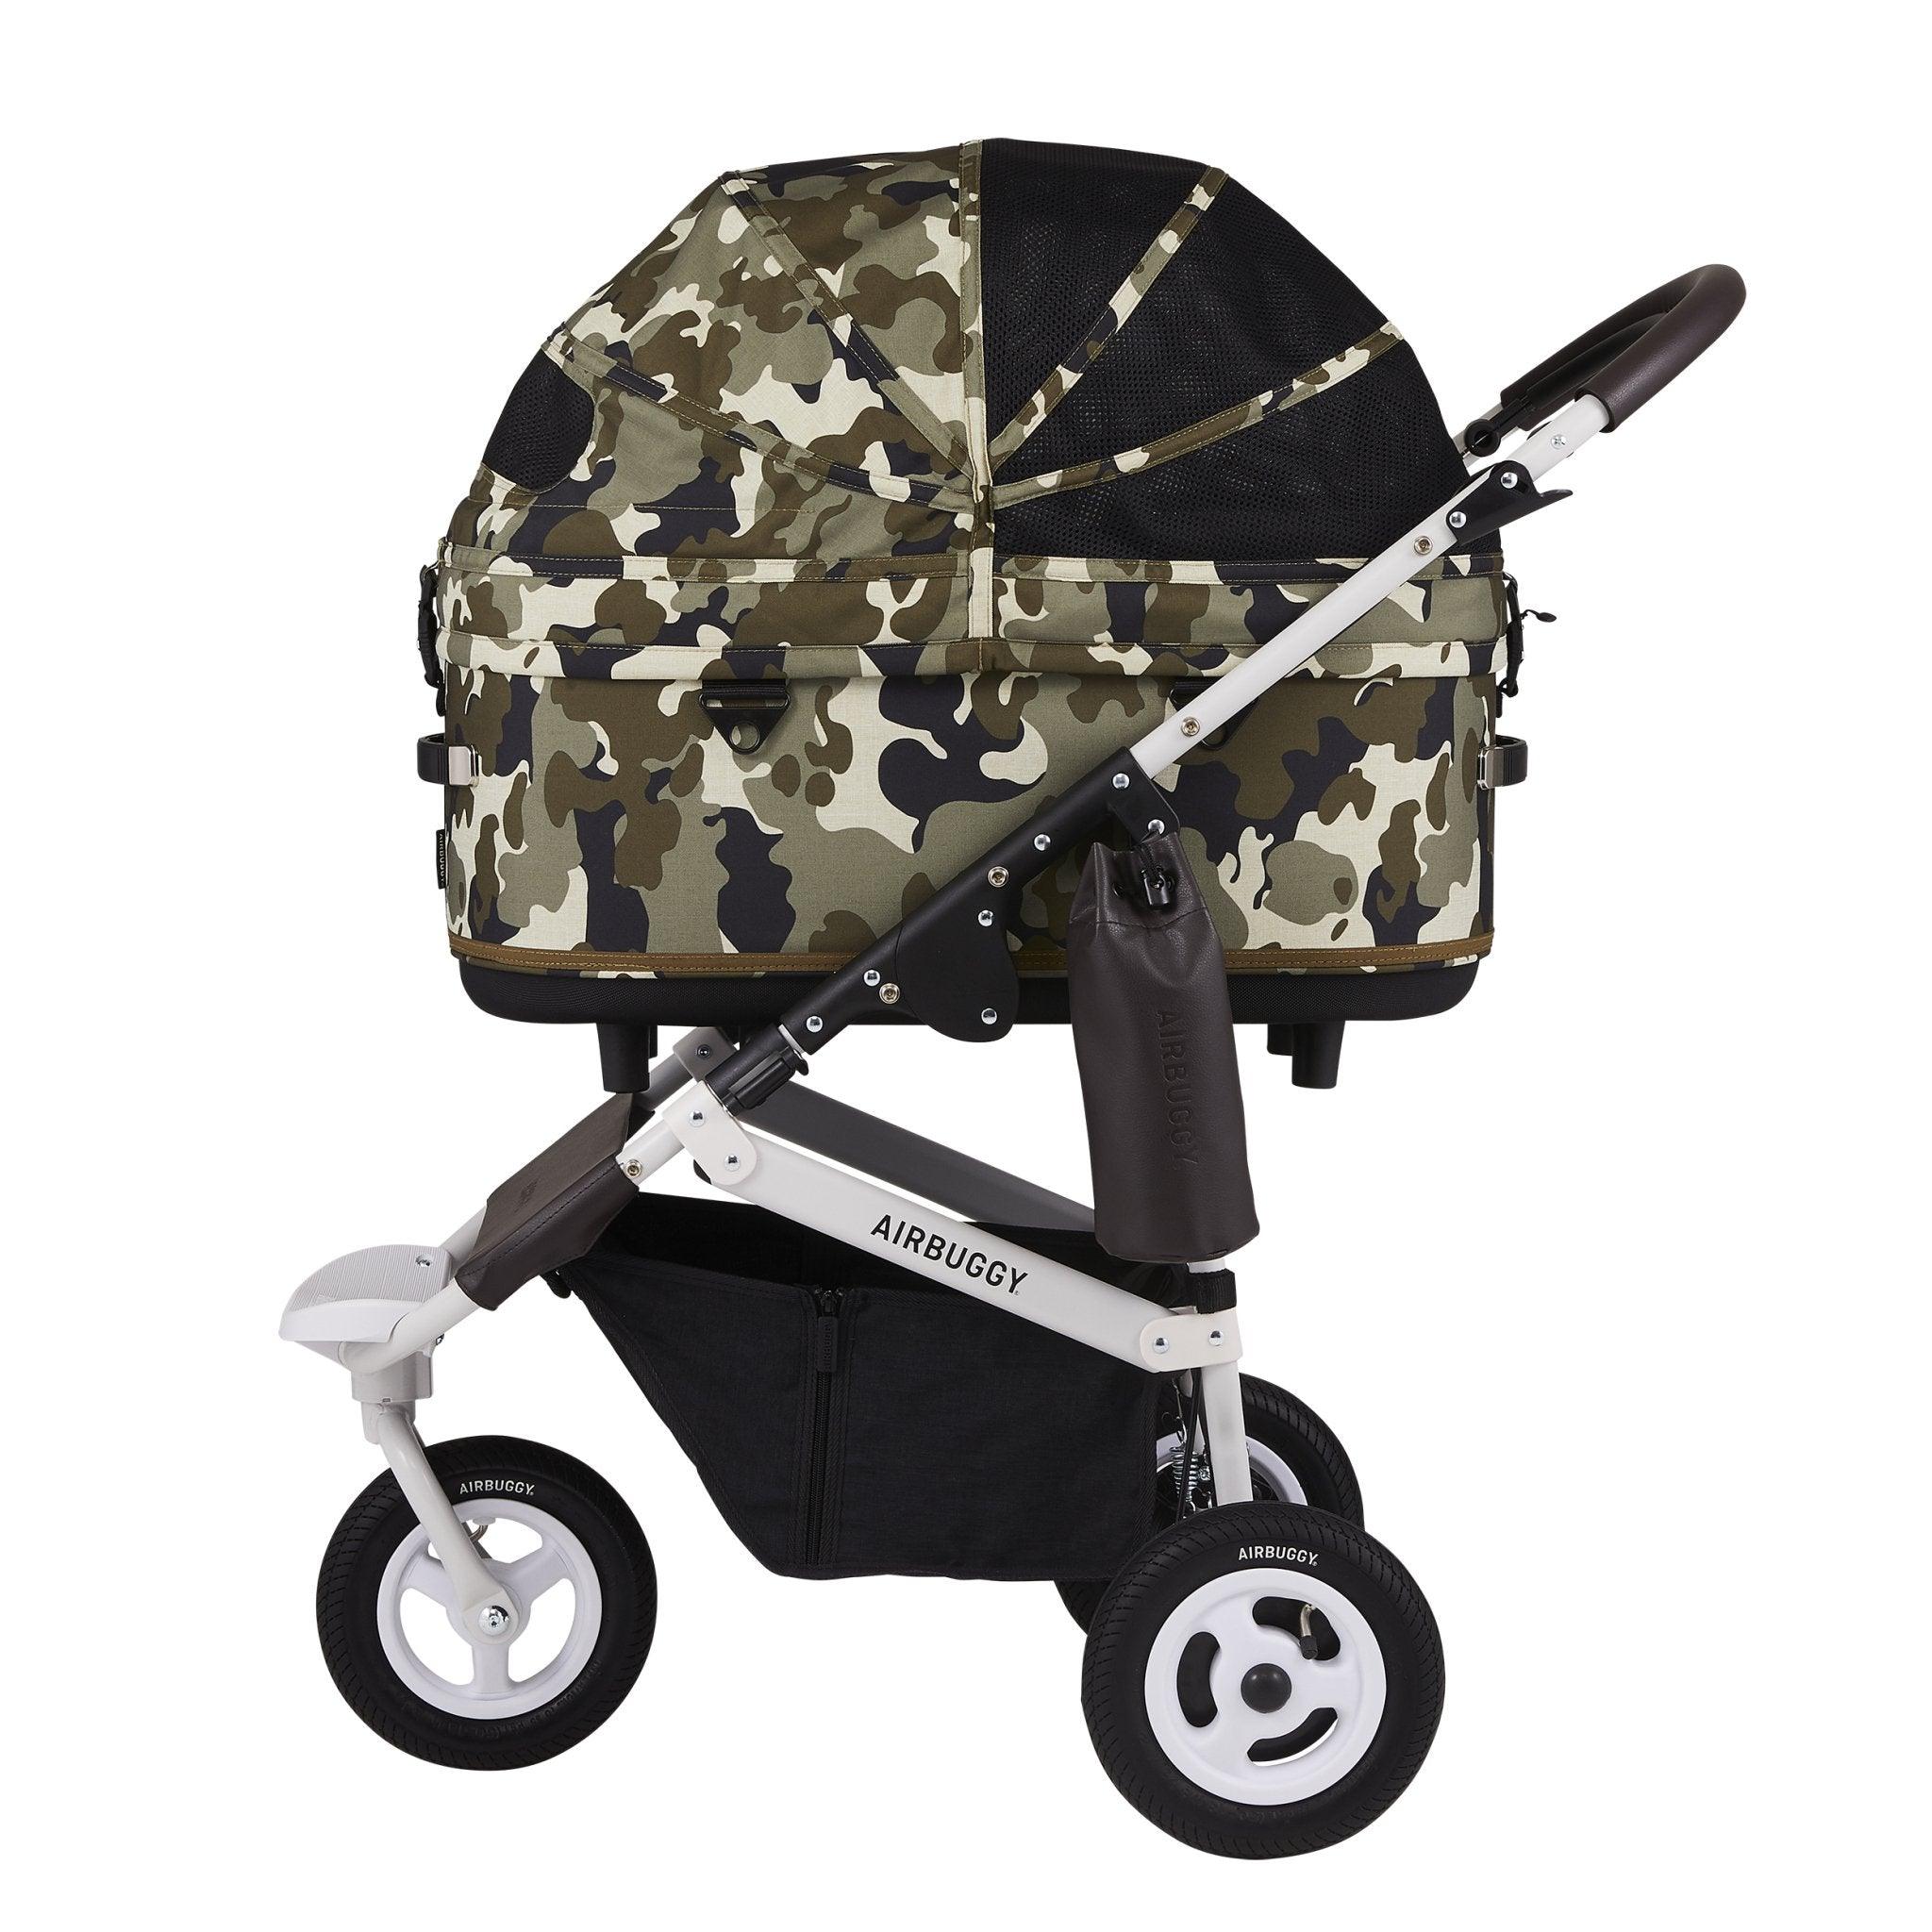 Dome 3 Set, Large Pet Stroller from AirBuggy